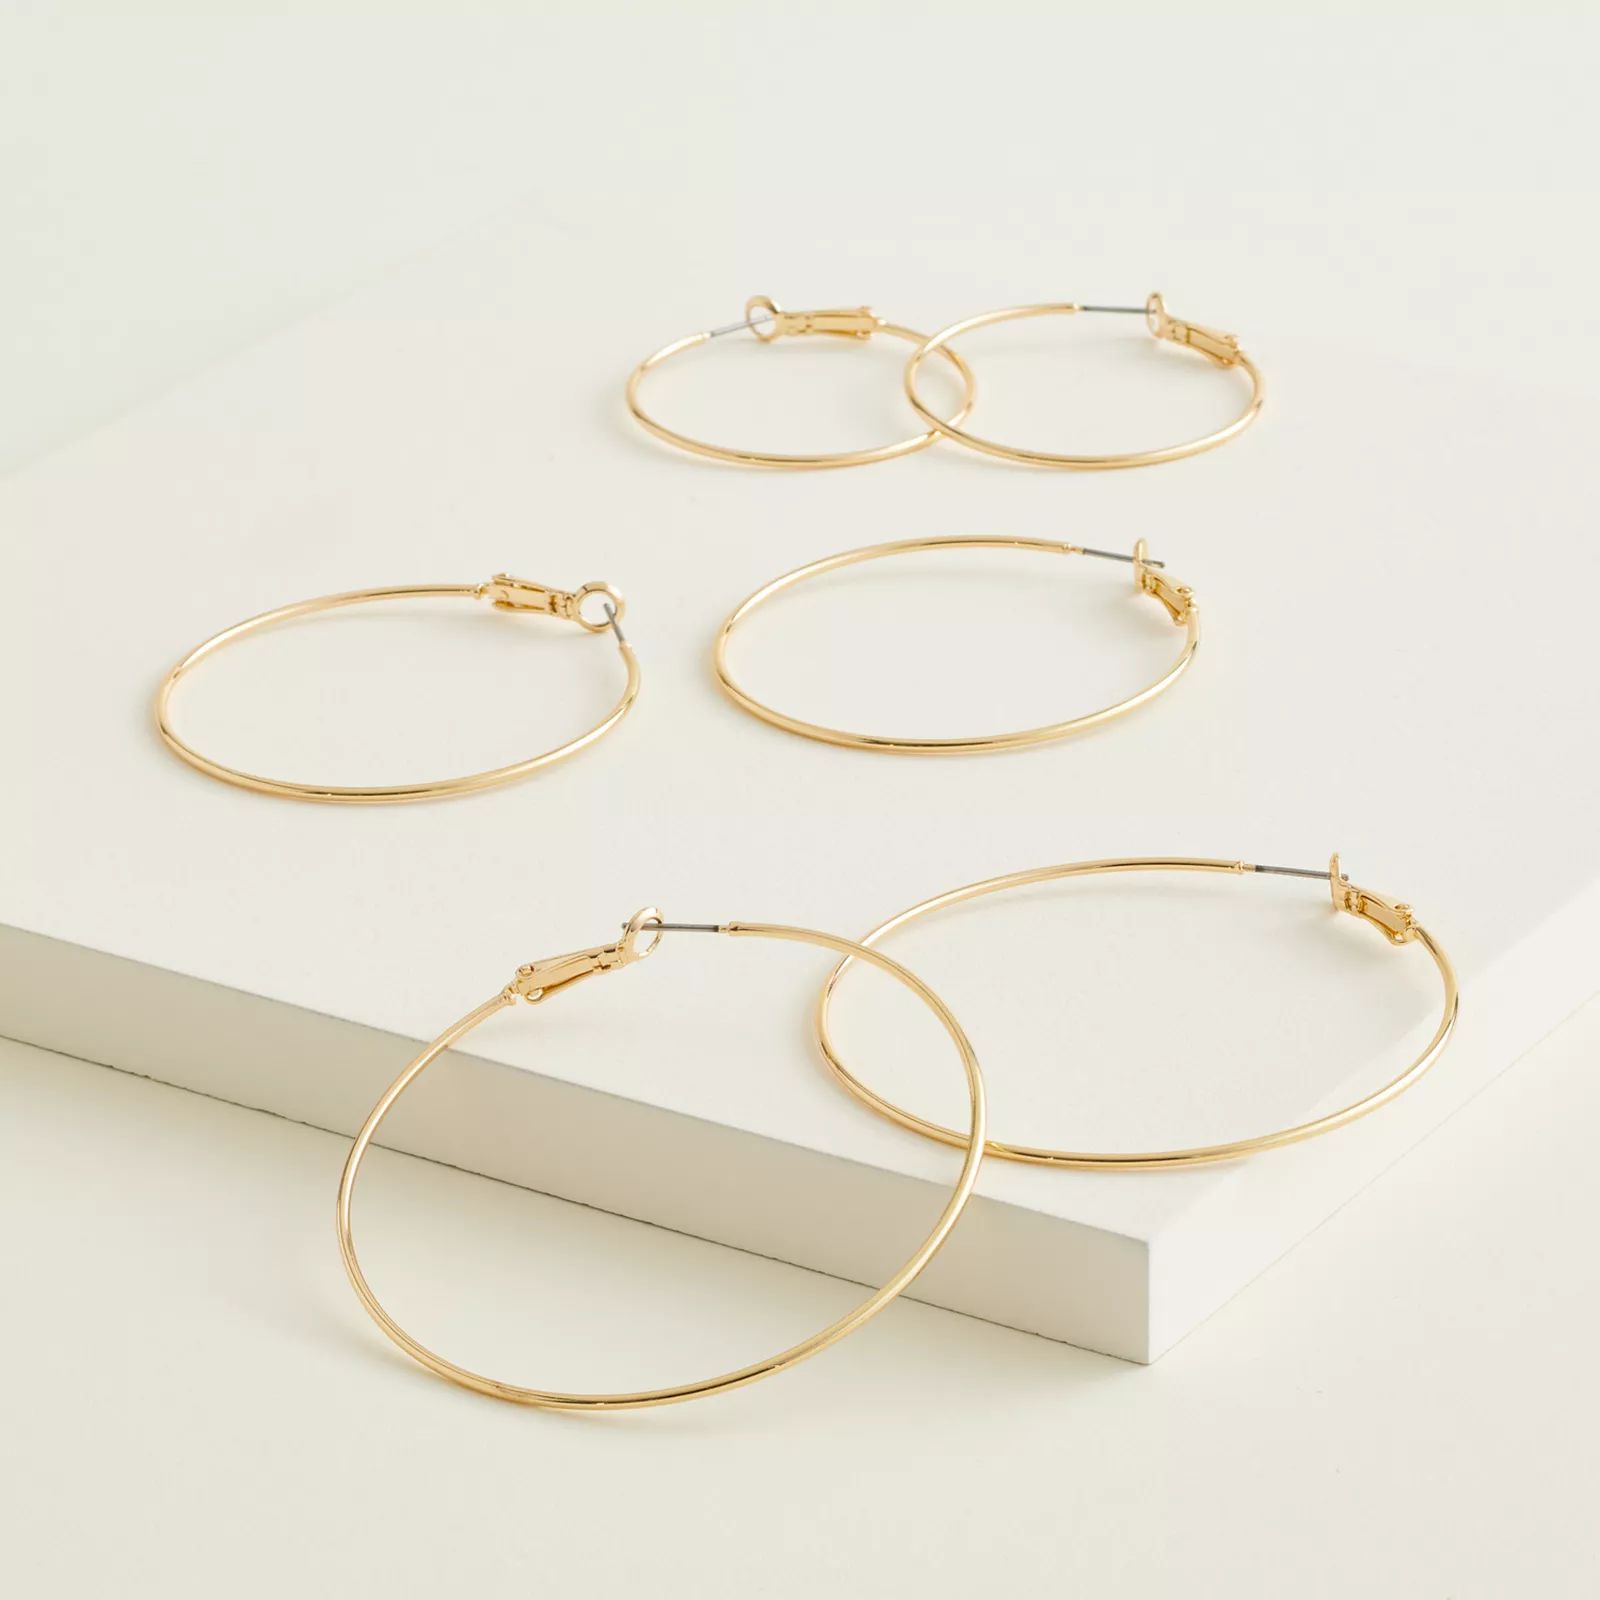 Elizabeth and James Gold Tone Thin Hammered Hoop Earring Set, Women's | Kohl's